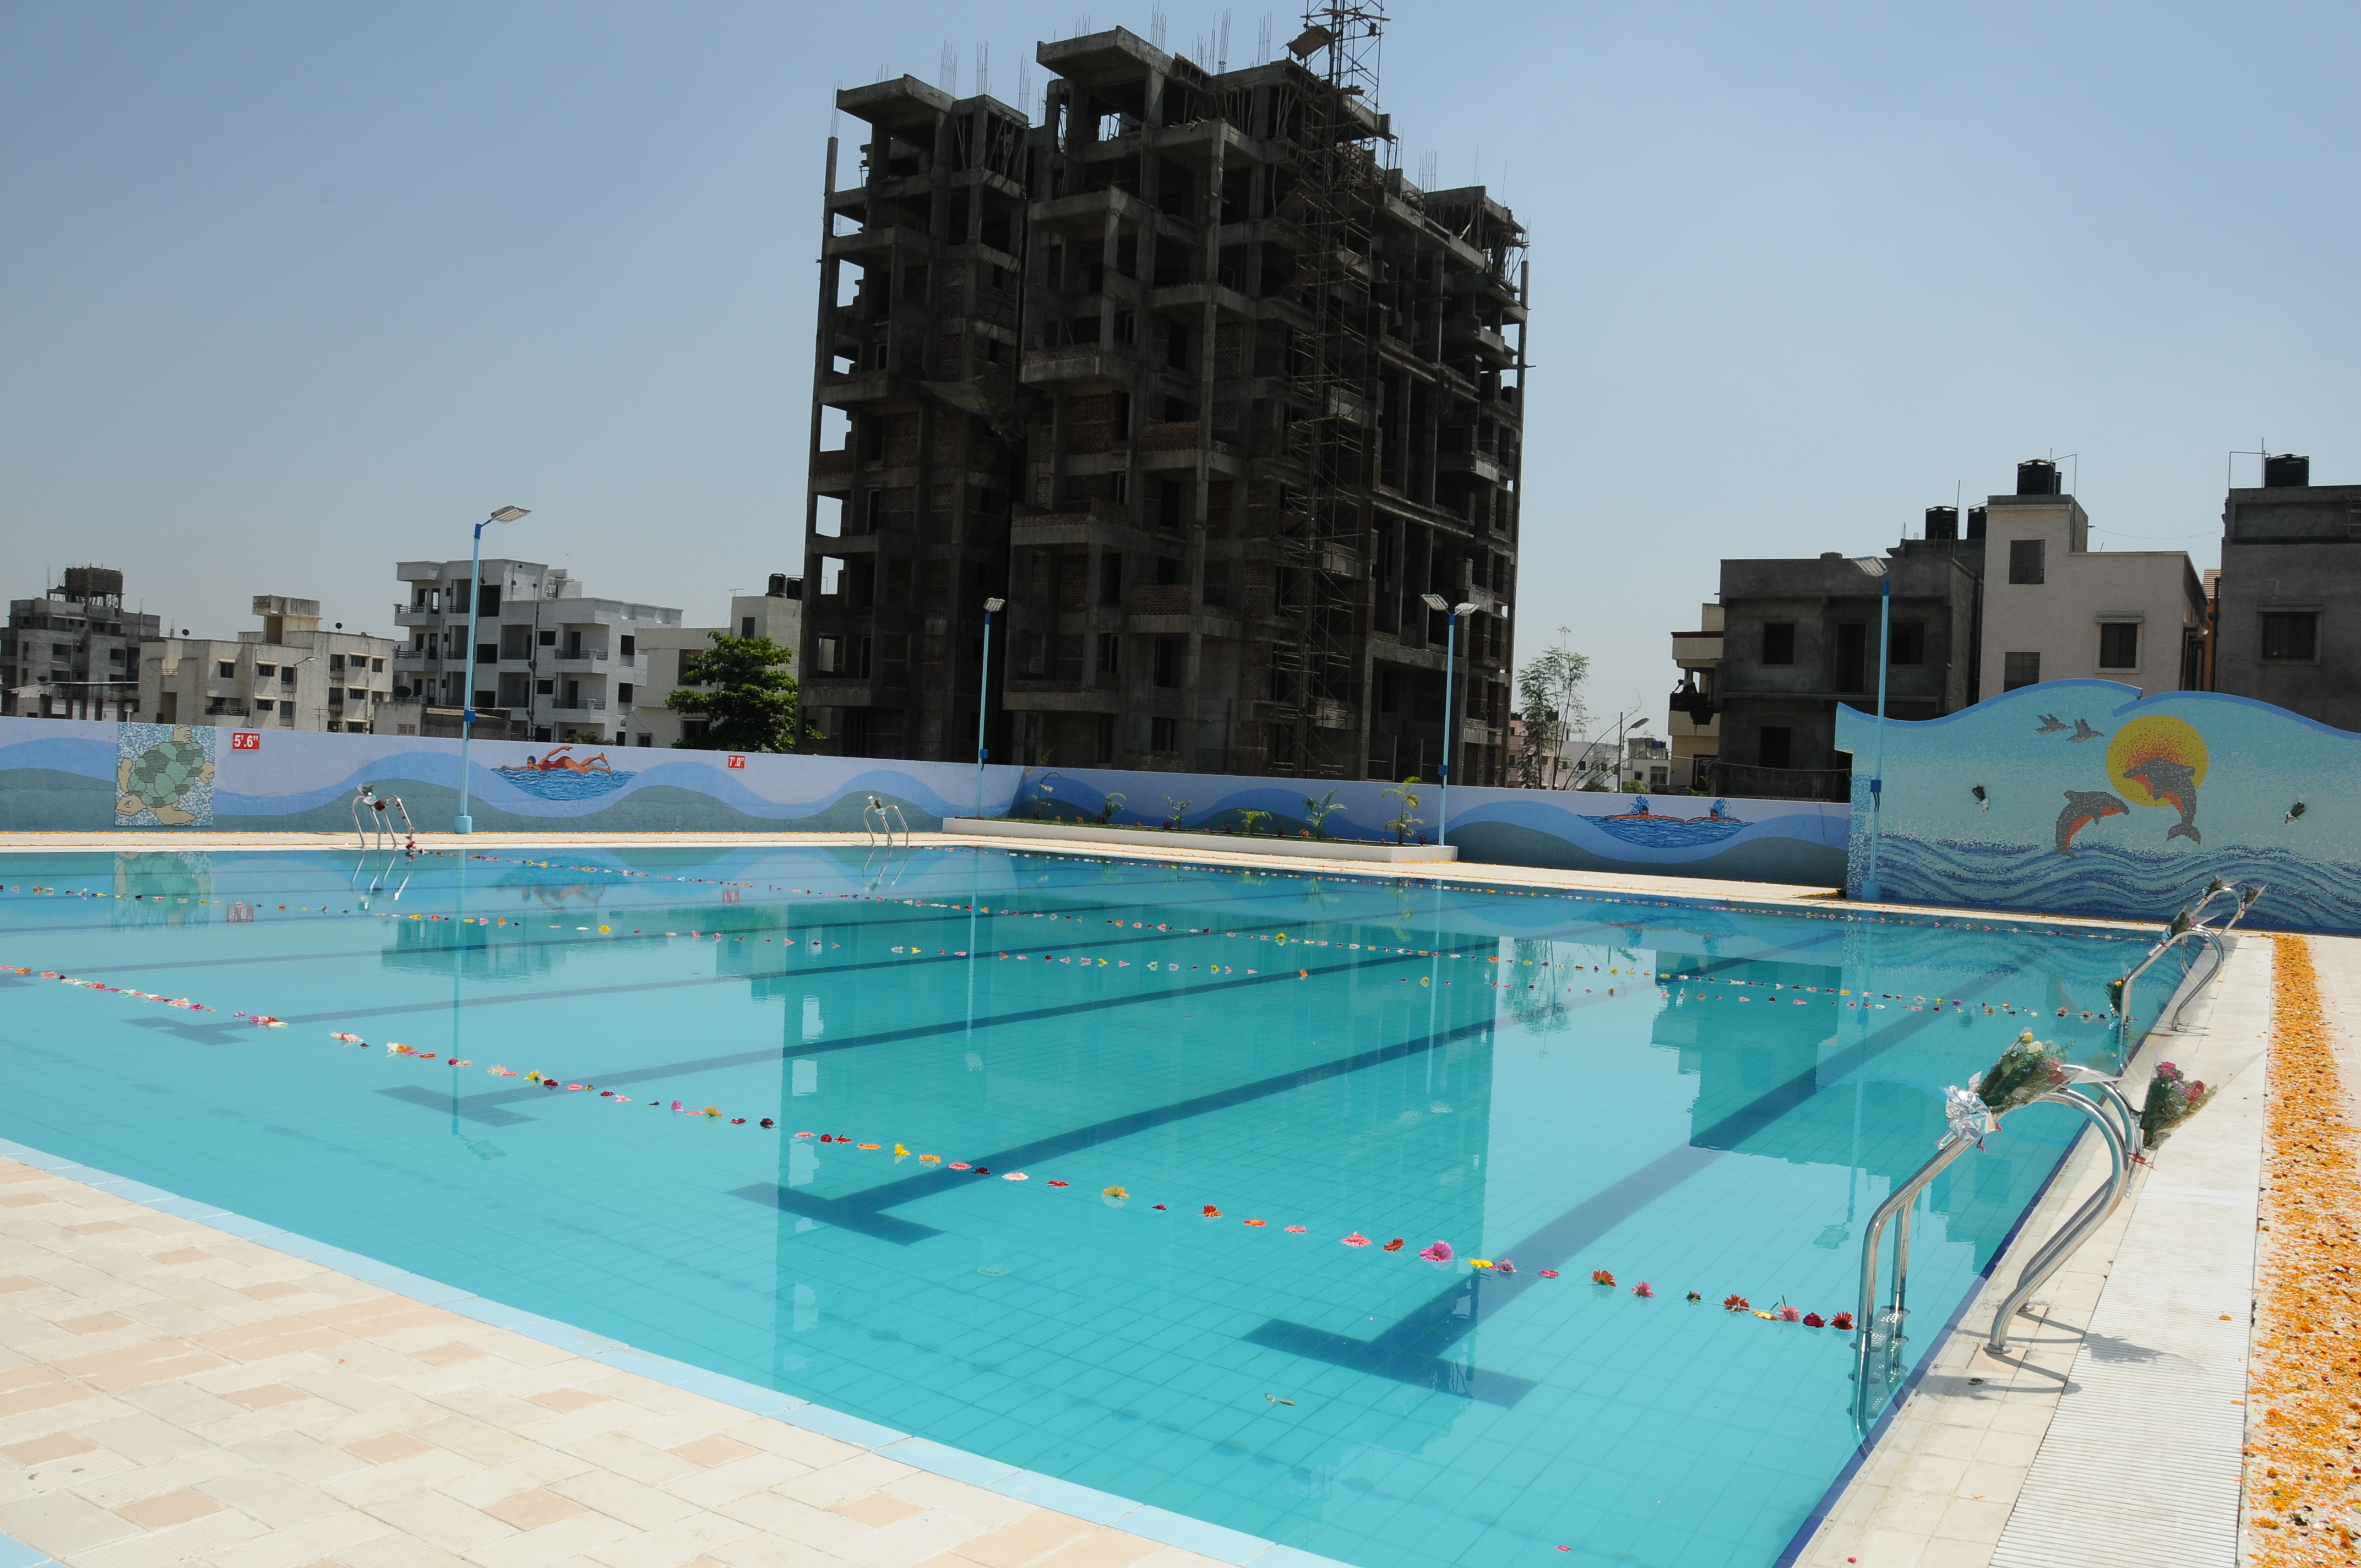 Commercial swimming pool design